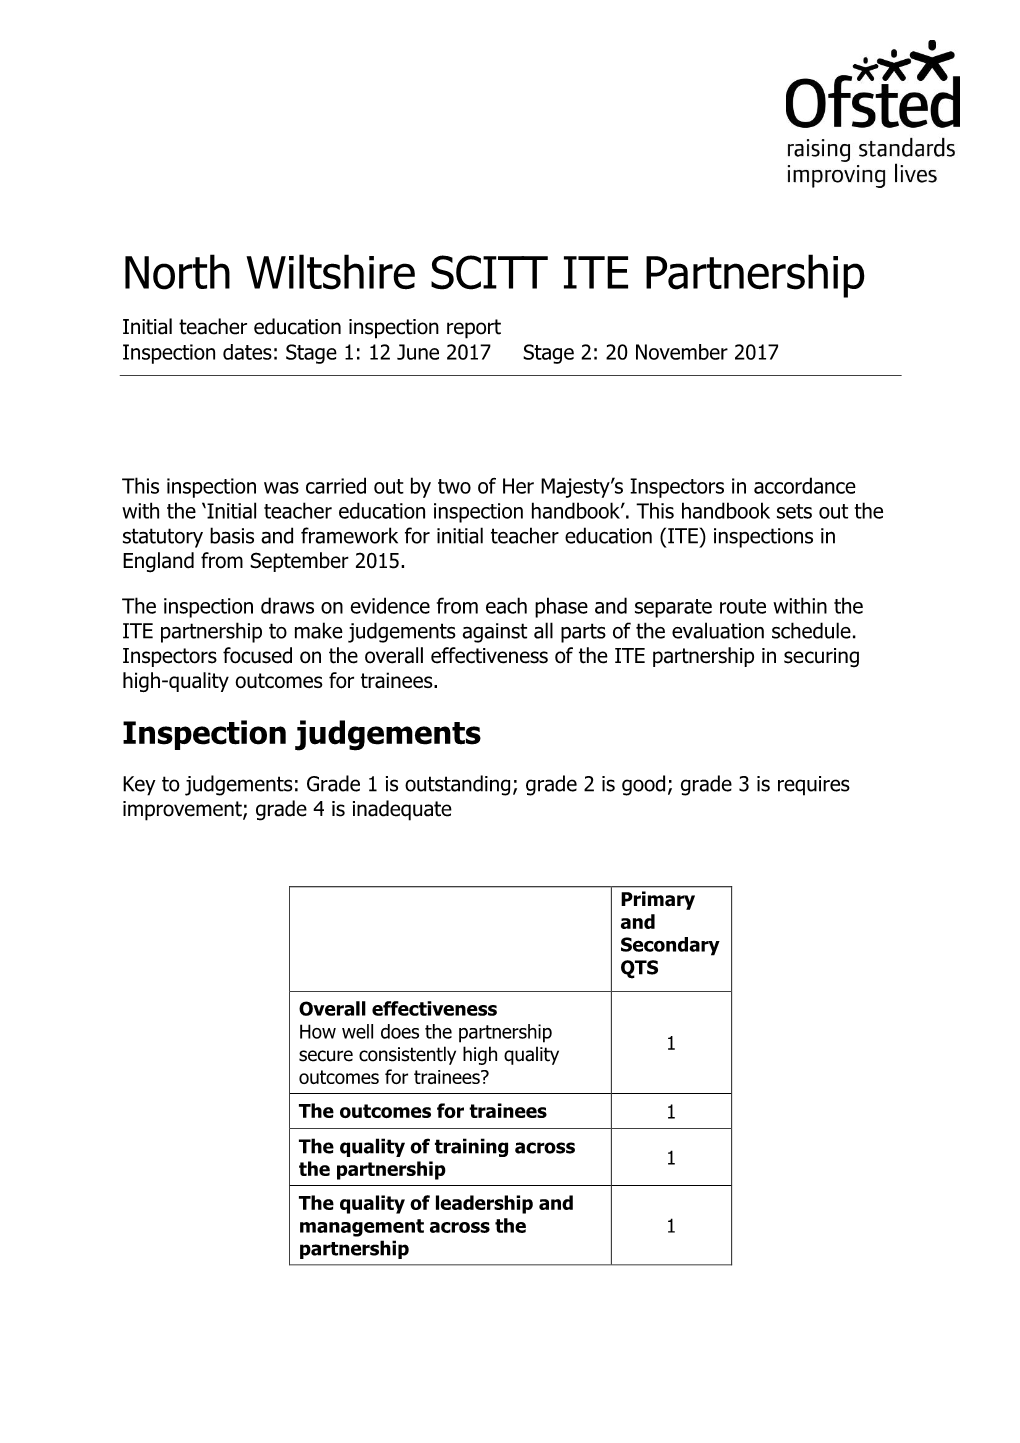 North Wiltshire SCITT ITE Partnership Initial Teacher Education Inspection Report Inspection Dates: Stage 1: 12 June 2017 Stage 2: 20 November 2017